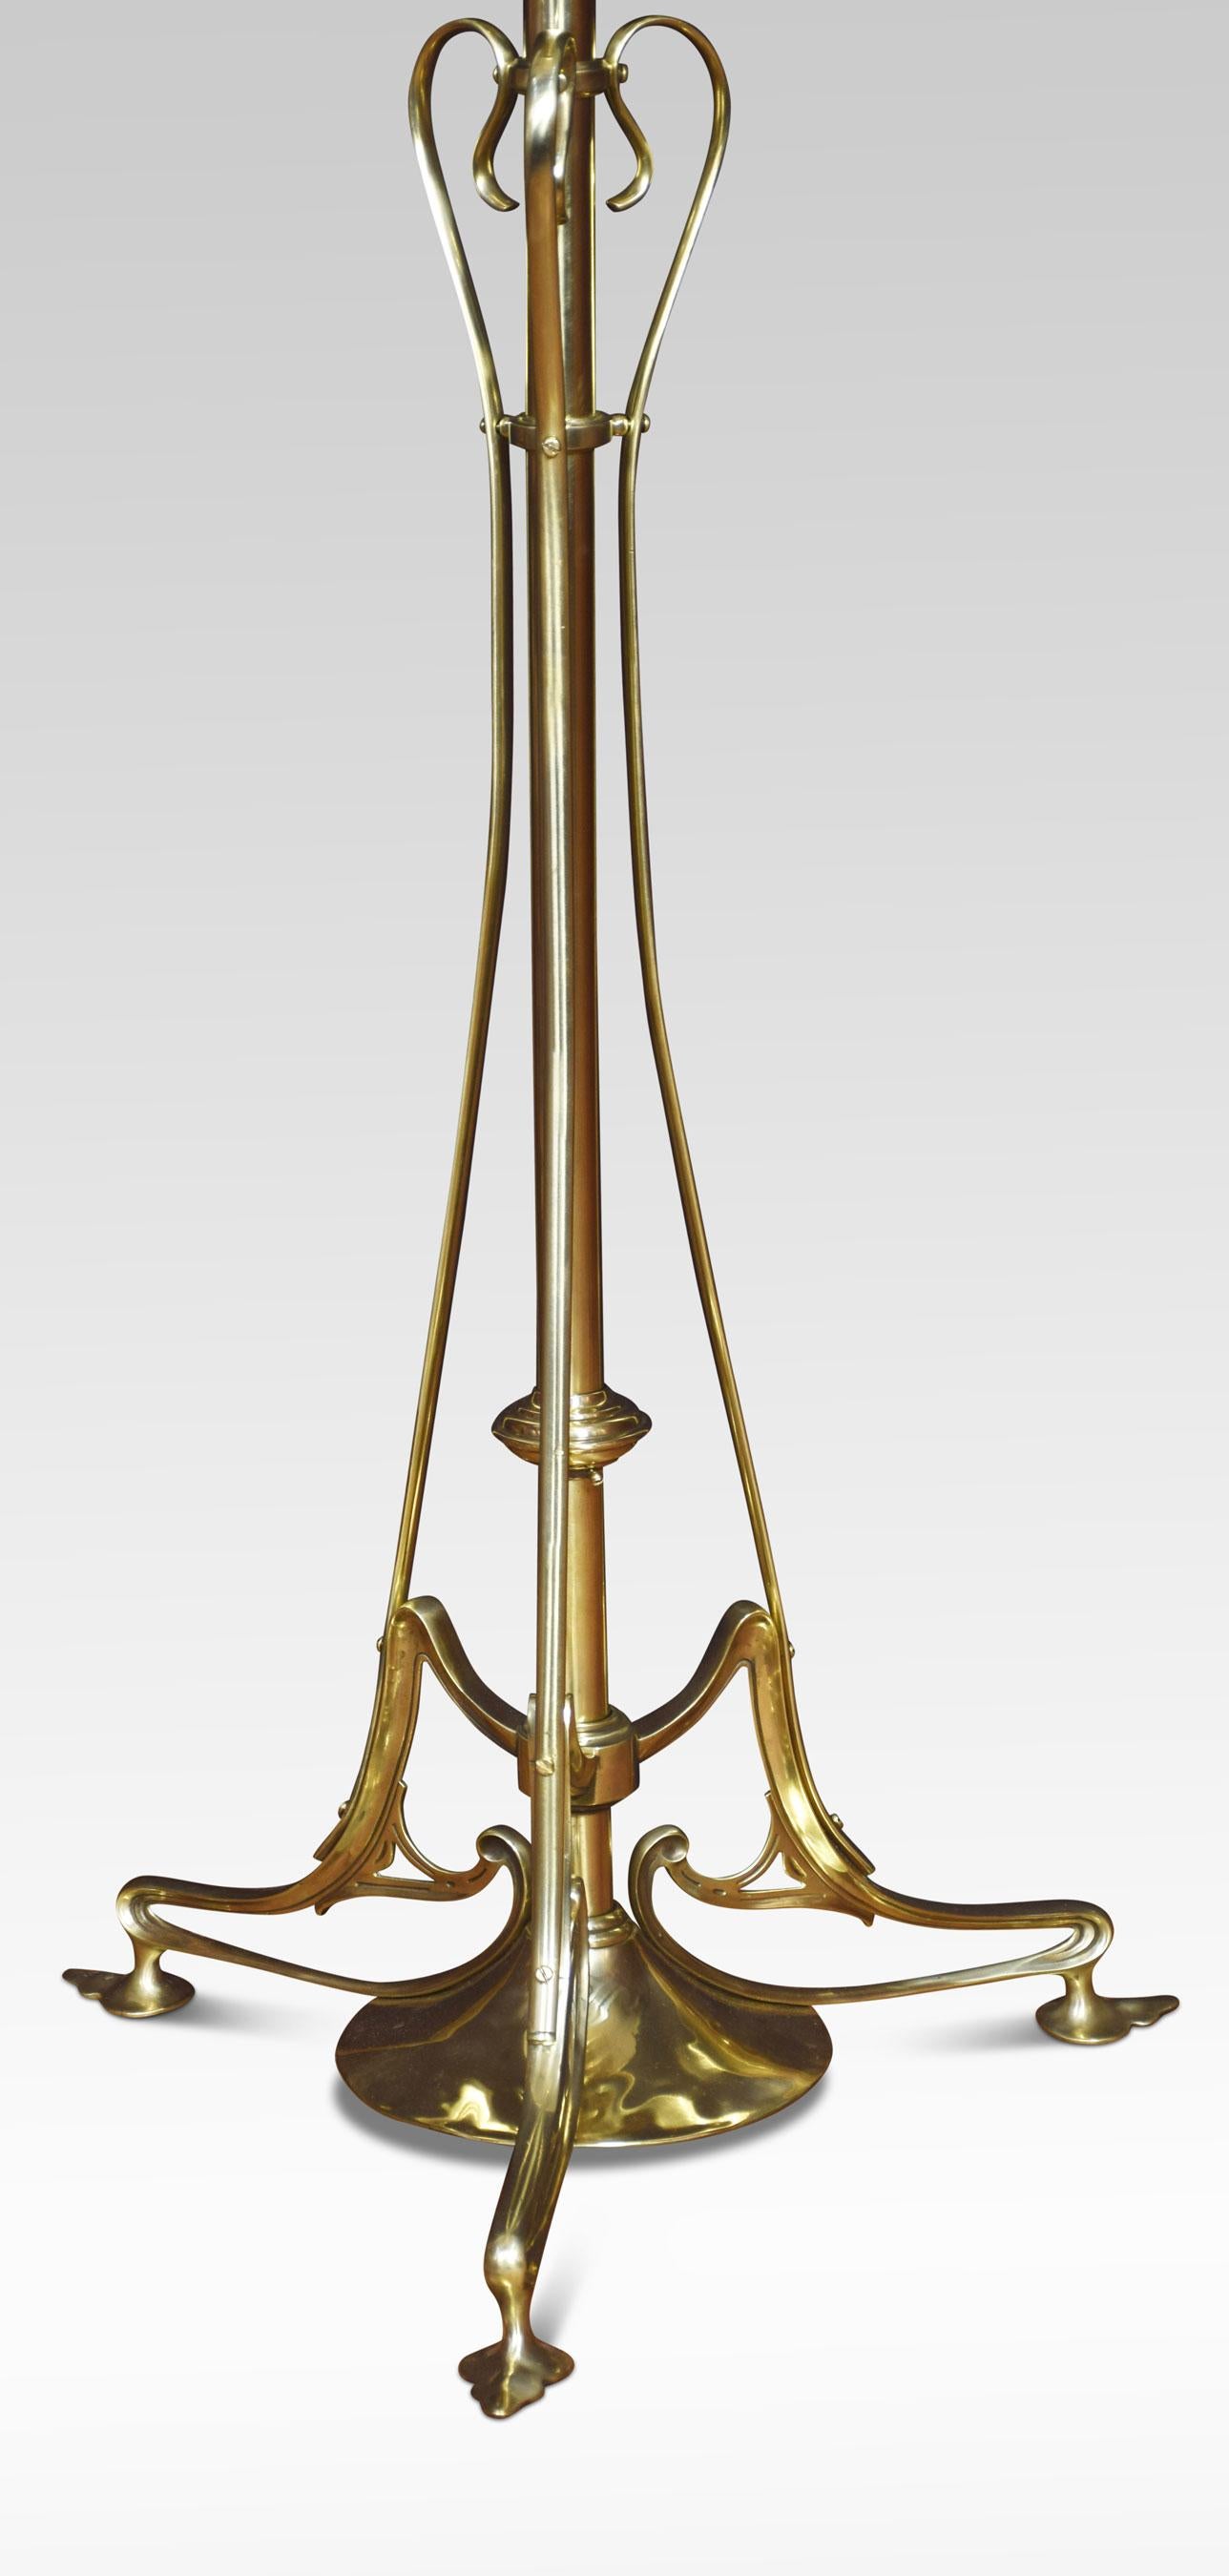 Art Nouveau brass standard lamp, the circular adjustable brass column raised up on outswept sinuous supports, terminating on leaf-like feet. Together with shade, the lamp has been rewired and tested.
Dimensions
Height 56.5 inches adjustable
Width